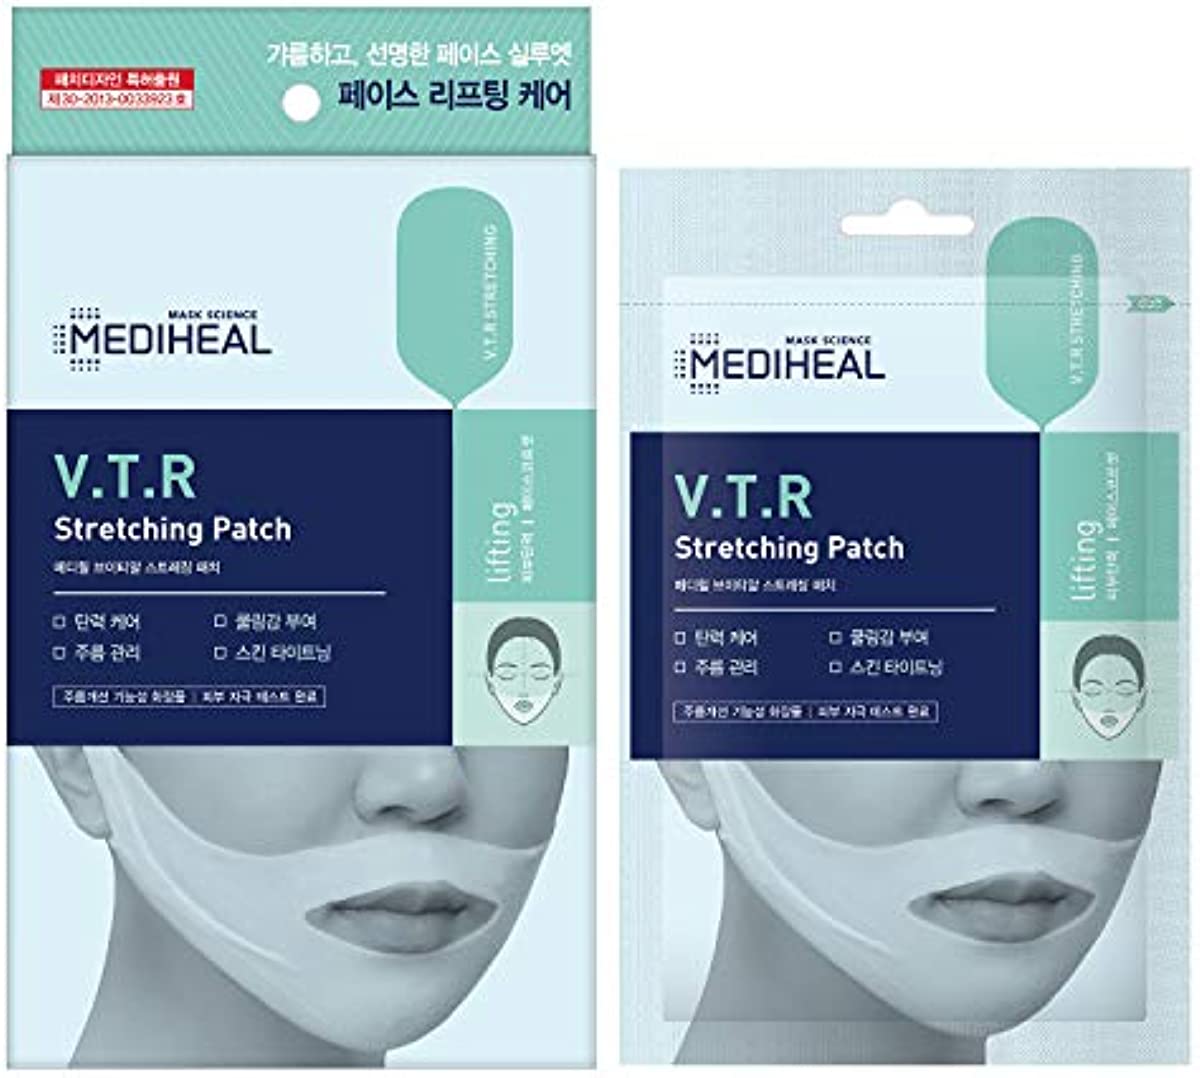 Mediheal V.T.R Stretching Patch 1 pack (4pcs) - High Adhesive Tension Intensive Face Lifting and Tightening Band Mask Sheet, Anti-Aging, Prevents Double Chin for Sagging Skin, Firming and Elasticity